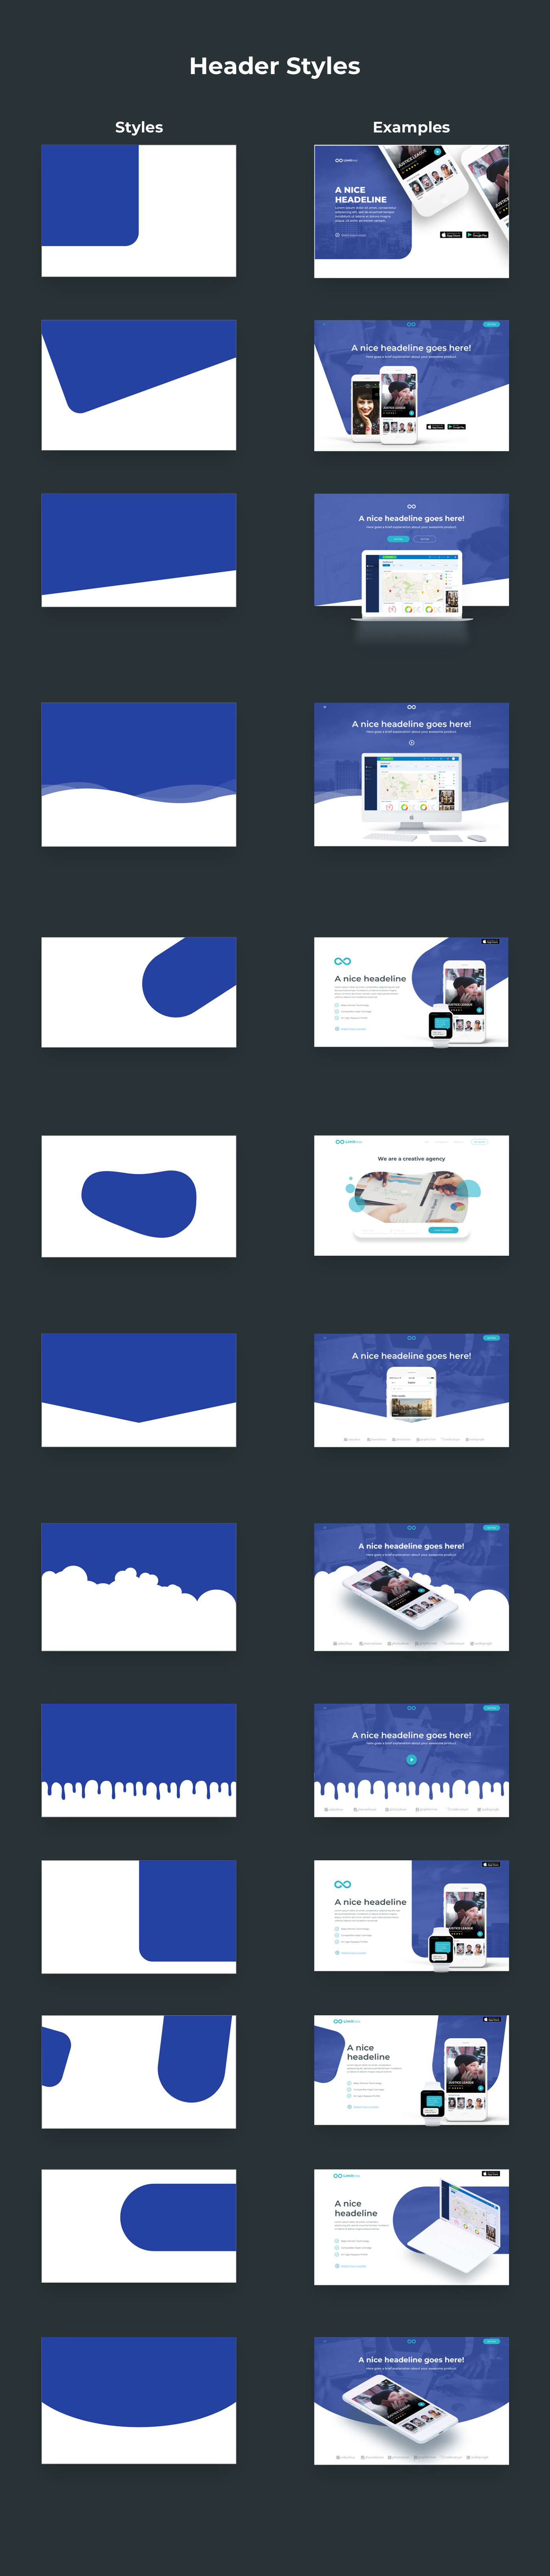 4d8e8962696433.5a9fd78368fb5 - Limitless - Massive set of layouts and UI components for Sketch